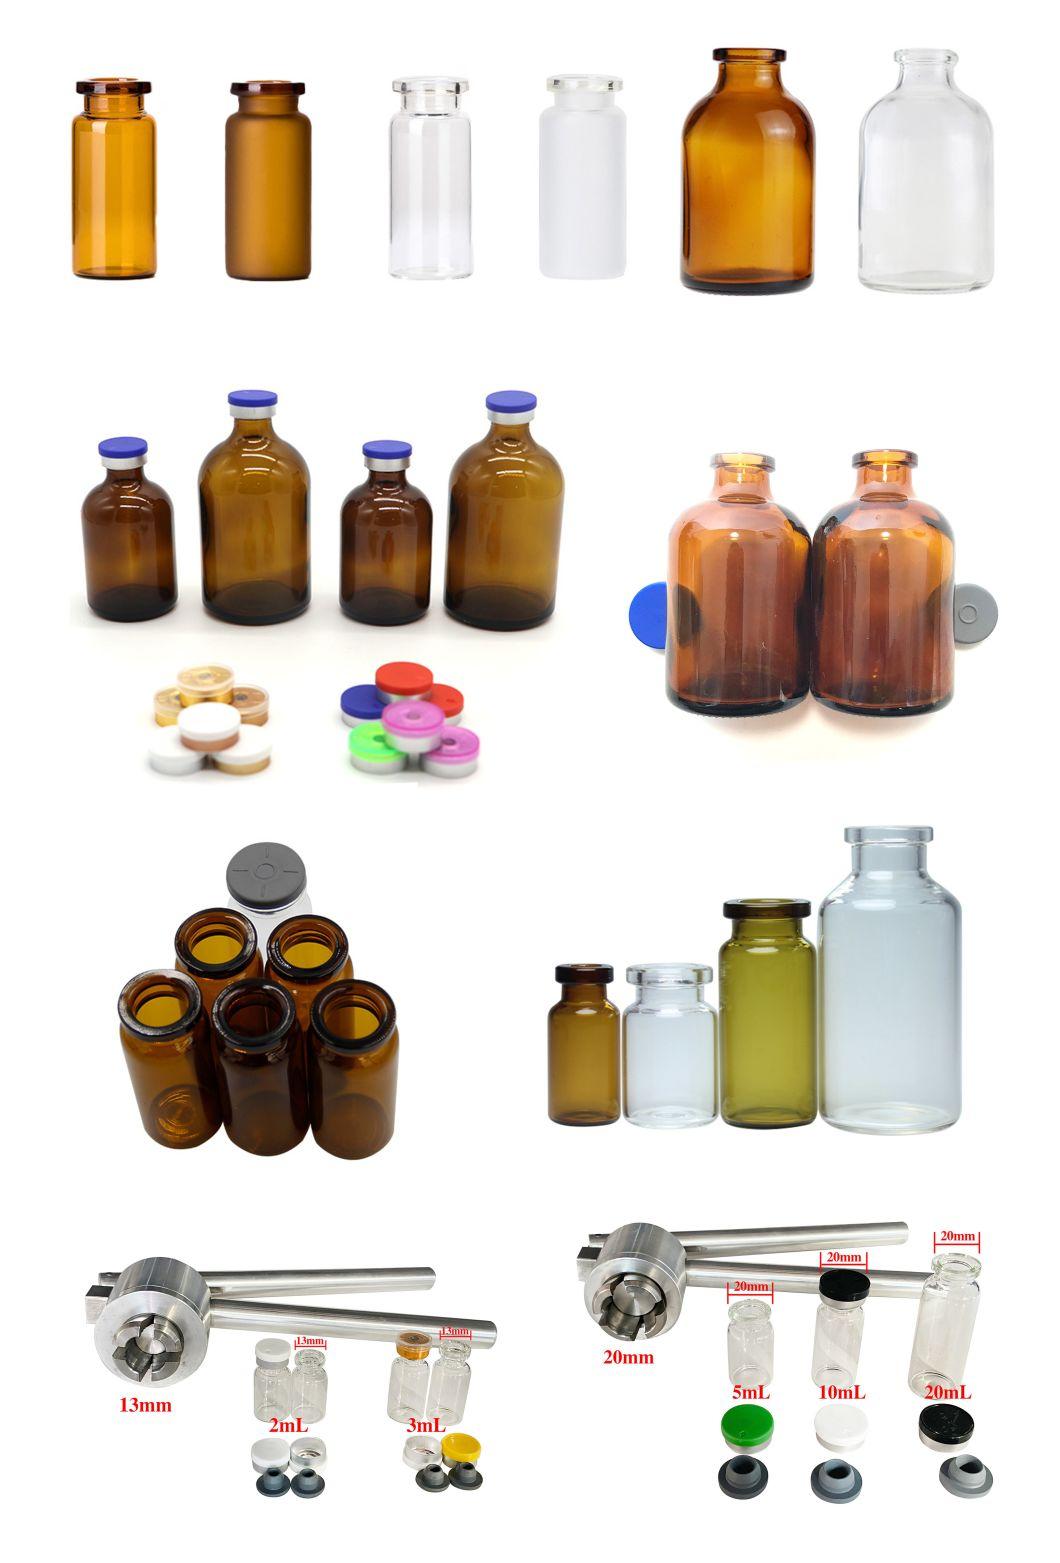 10ml 20ml 30ml 50ml 100ml Amber Sterile Injection Mould Type Glass Vials for Injection